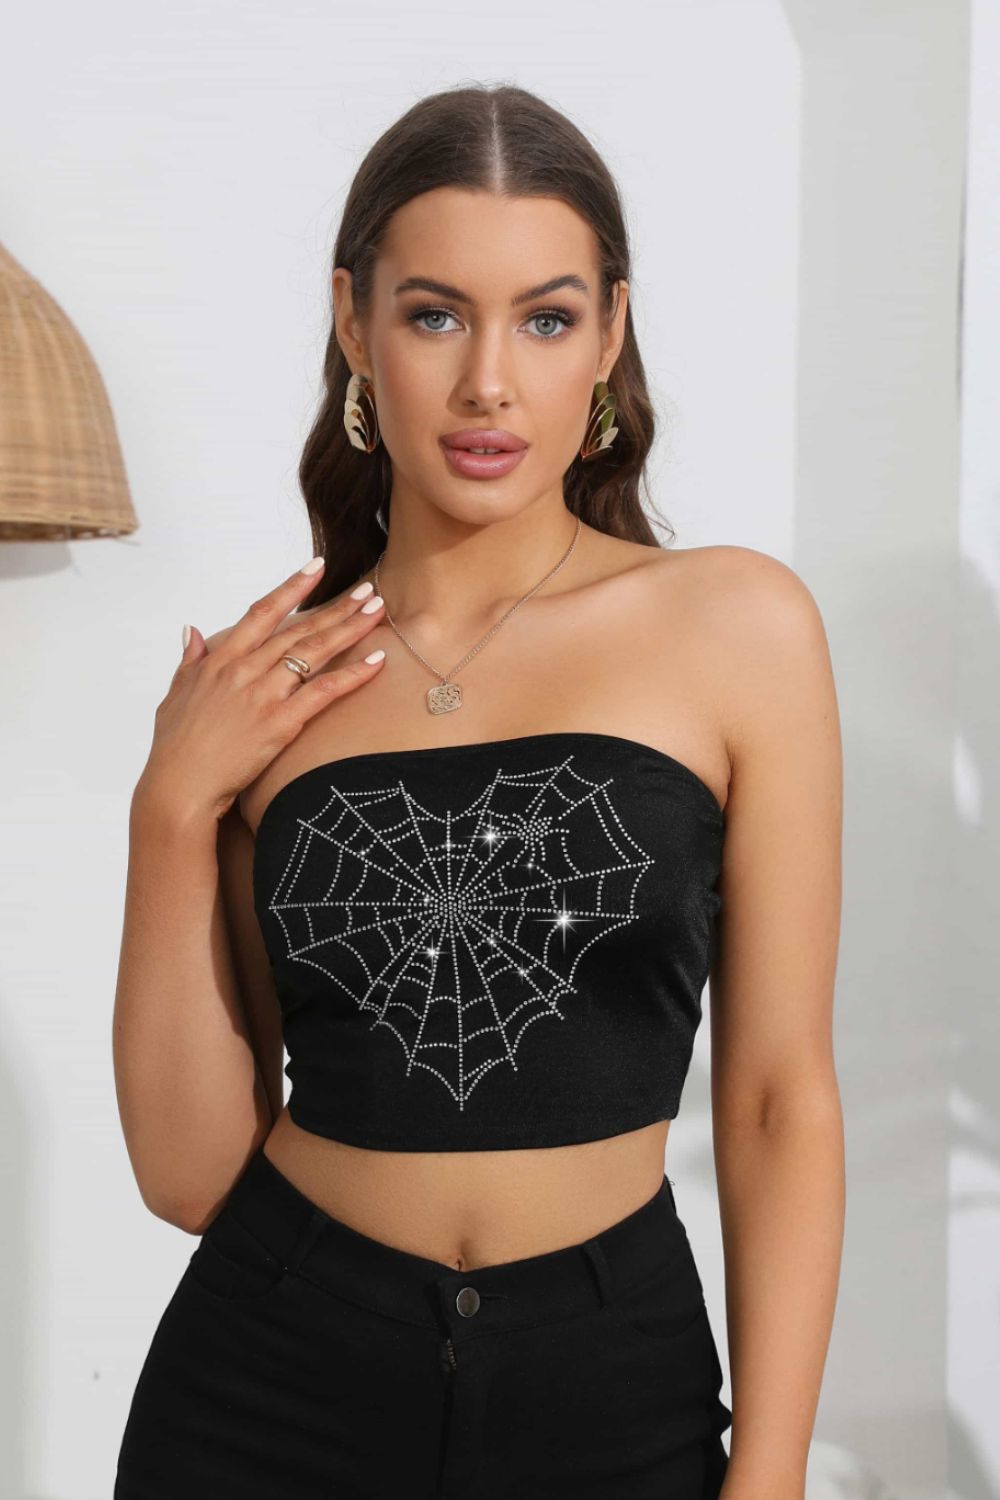 Heart Spider Web Graphic Tube Top with Rhinestones in Black